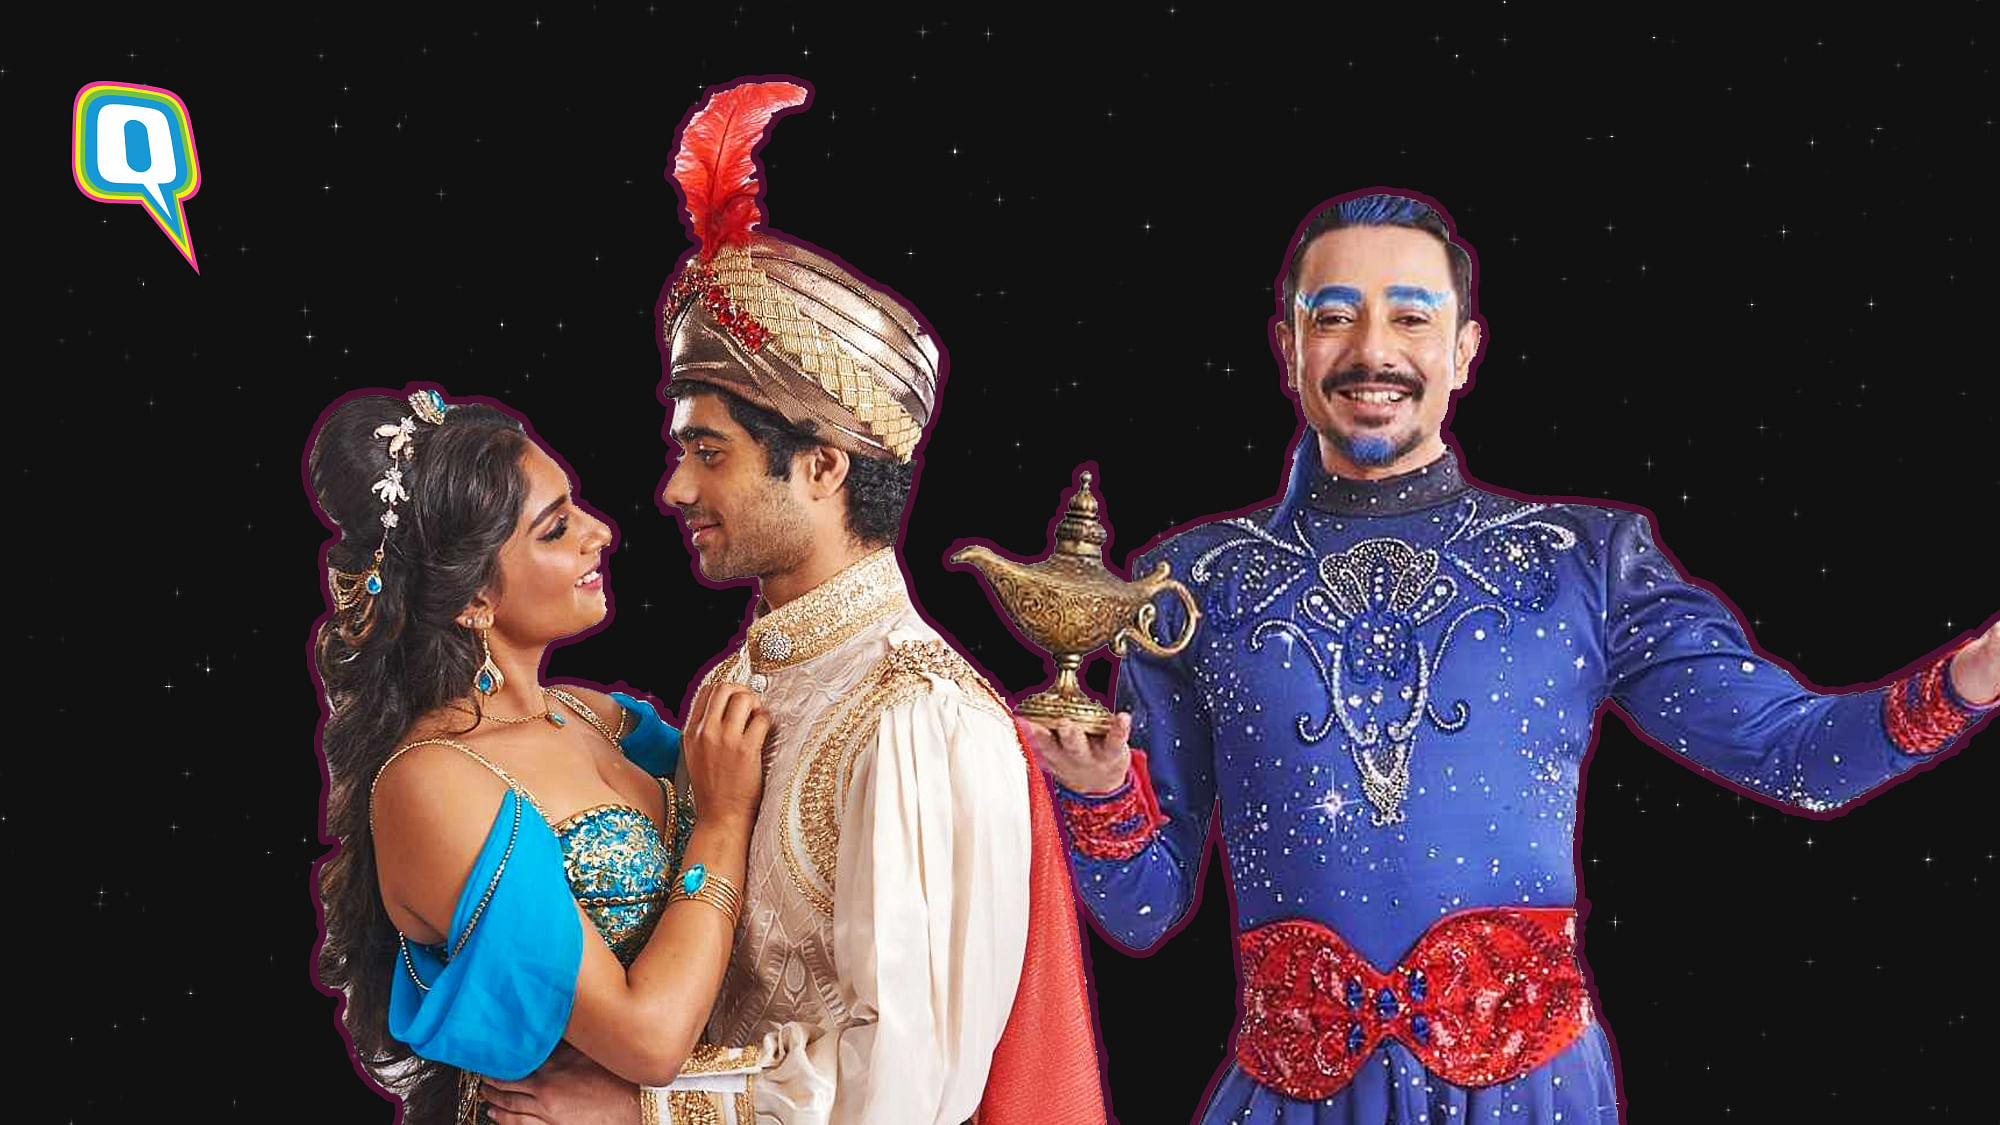 Your wish has been granted! Aladdin is back!